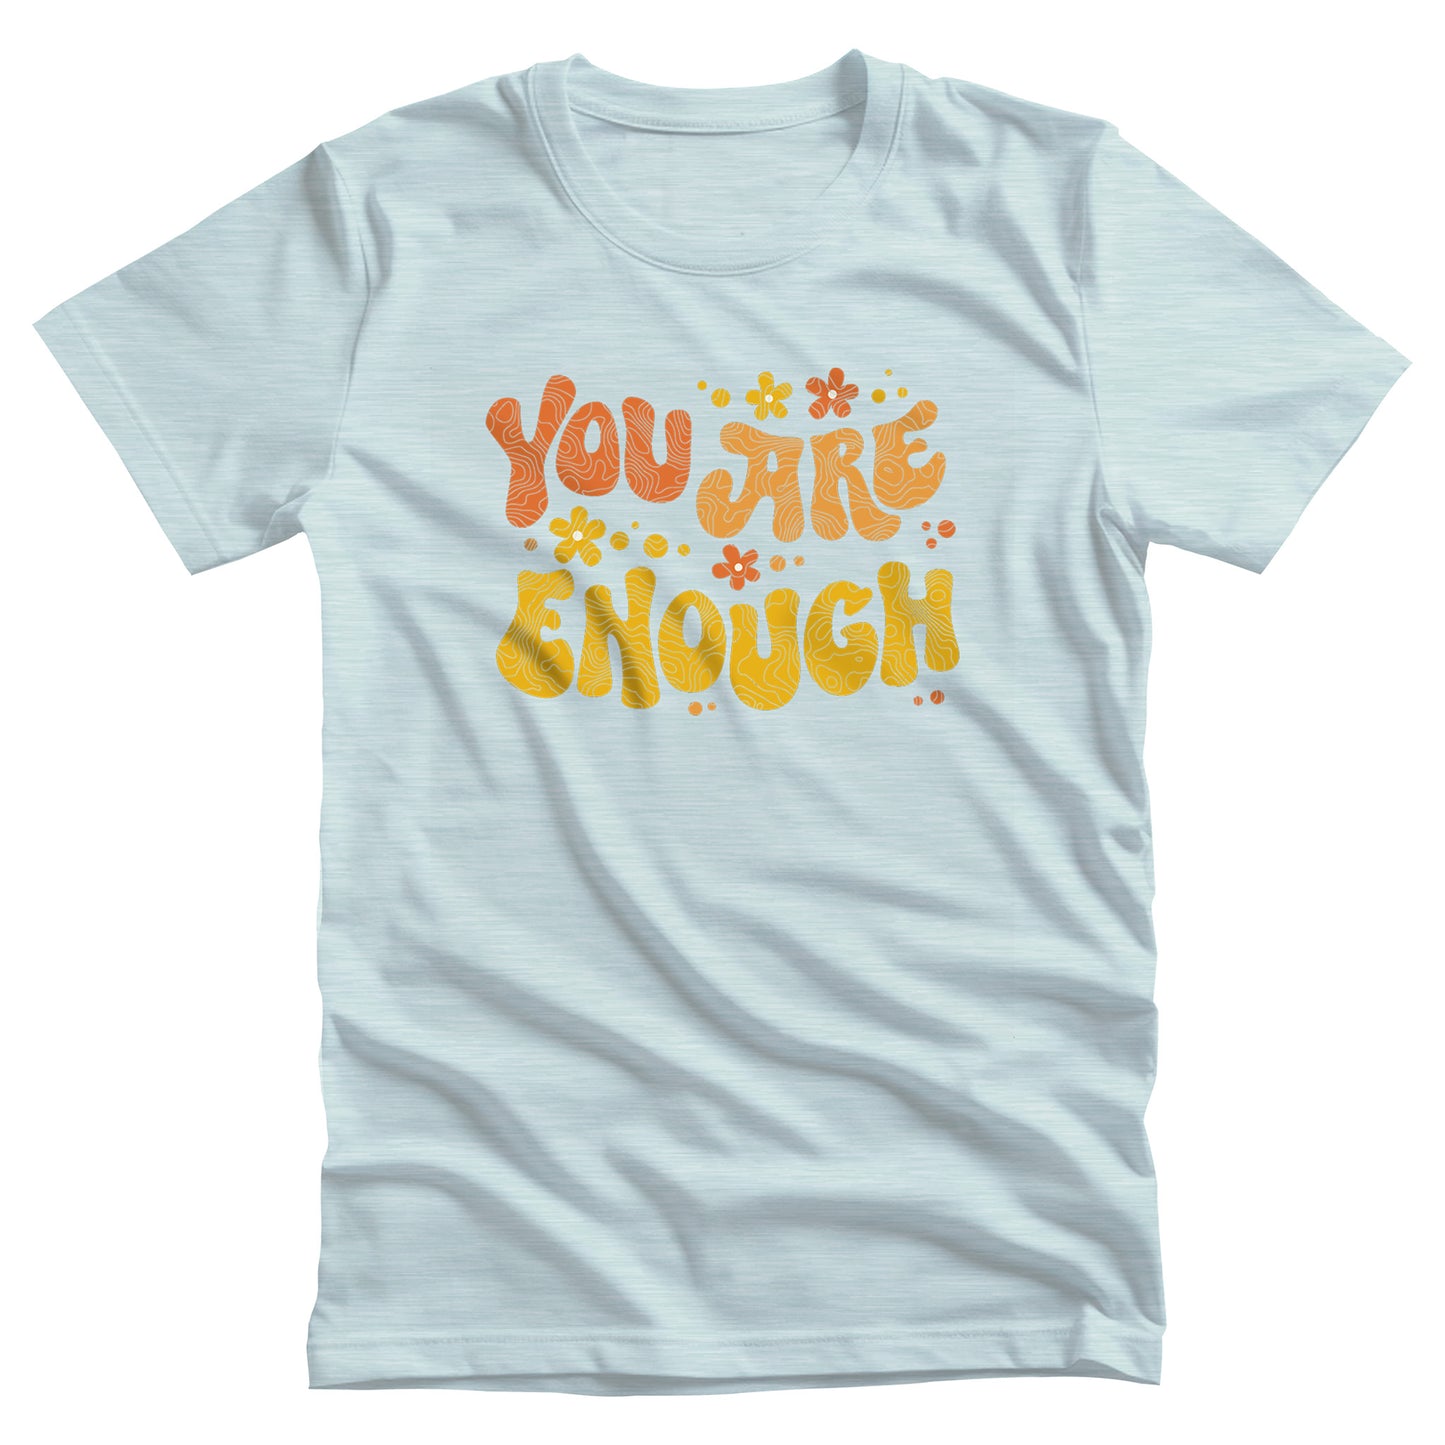 Heather Ice Blue color unisex t-shirt with a graphic that says “You Are Enough” in a retro font. There are small retro flowers spaced throughout. “You” is reddish-orange, “Are” is orange, and “Enough” is yellow, all retro as well.